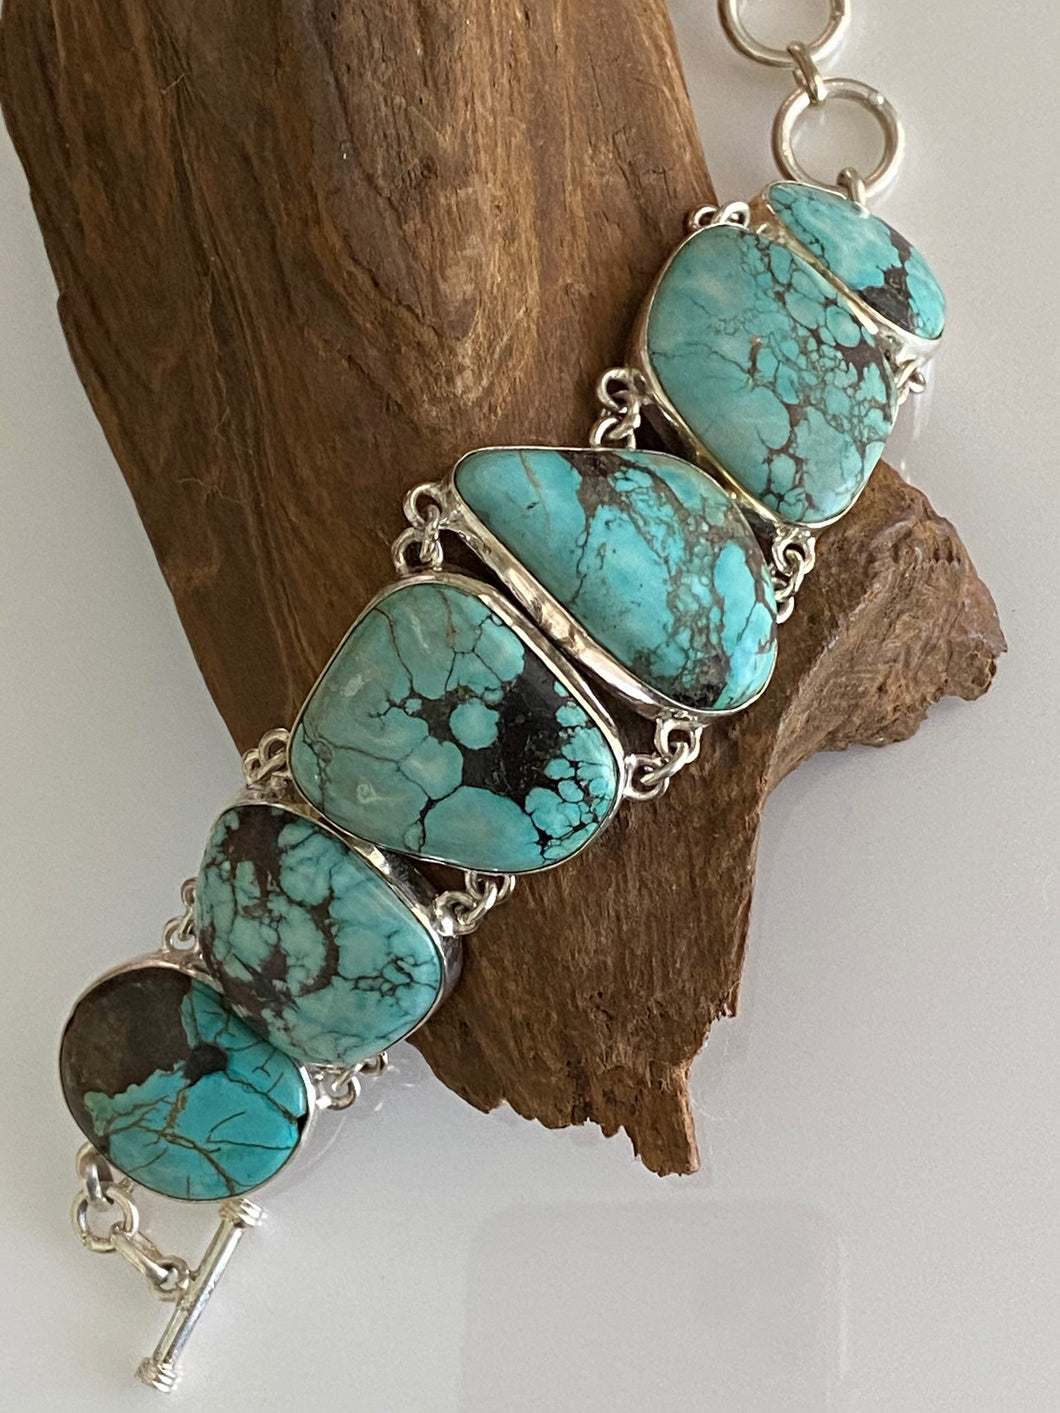 Lone Mountain Turquoise Bracelet, by David Lister– Raven Makes Gallery